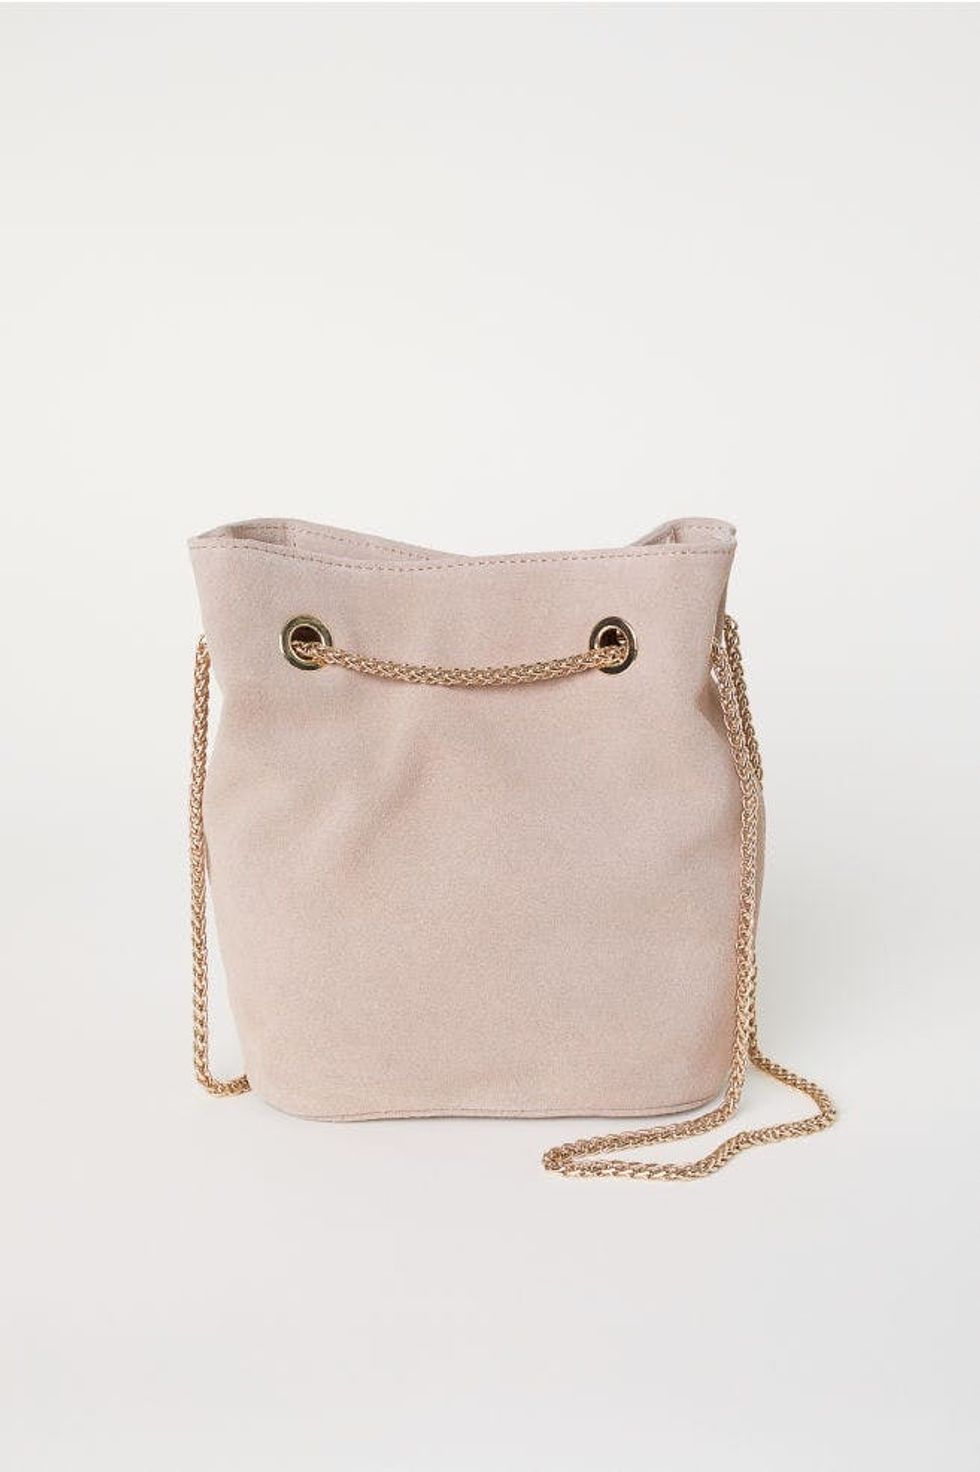 21 Spring-Ready Bucket Bags for Under $100 - Brit + Co